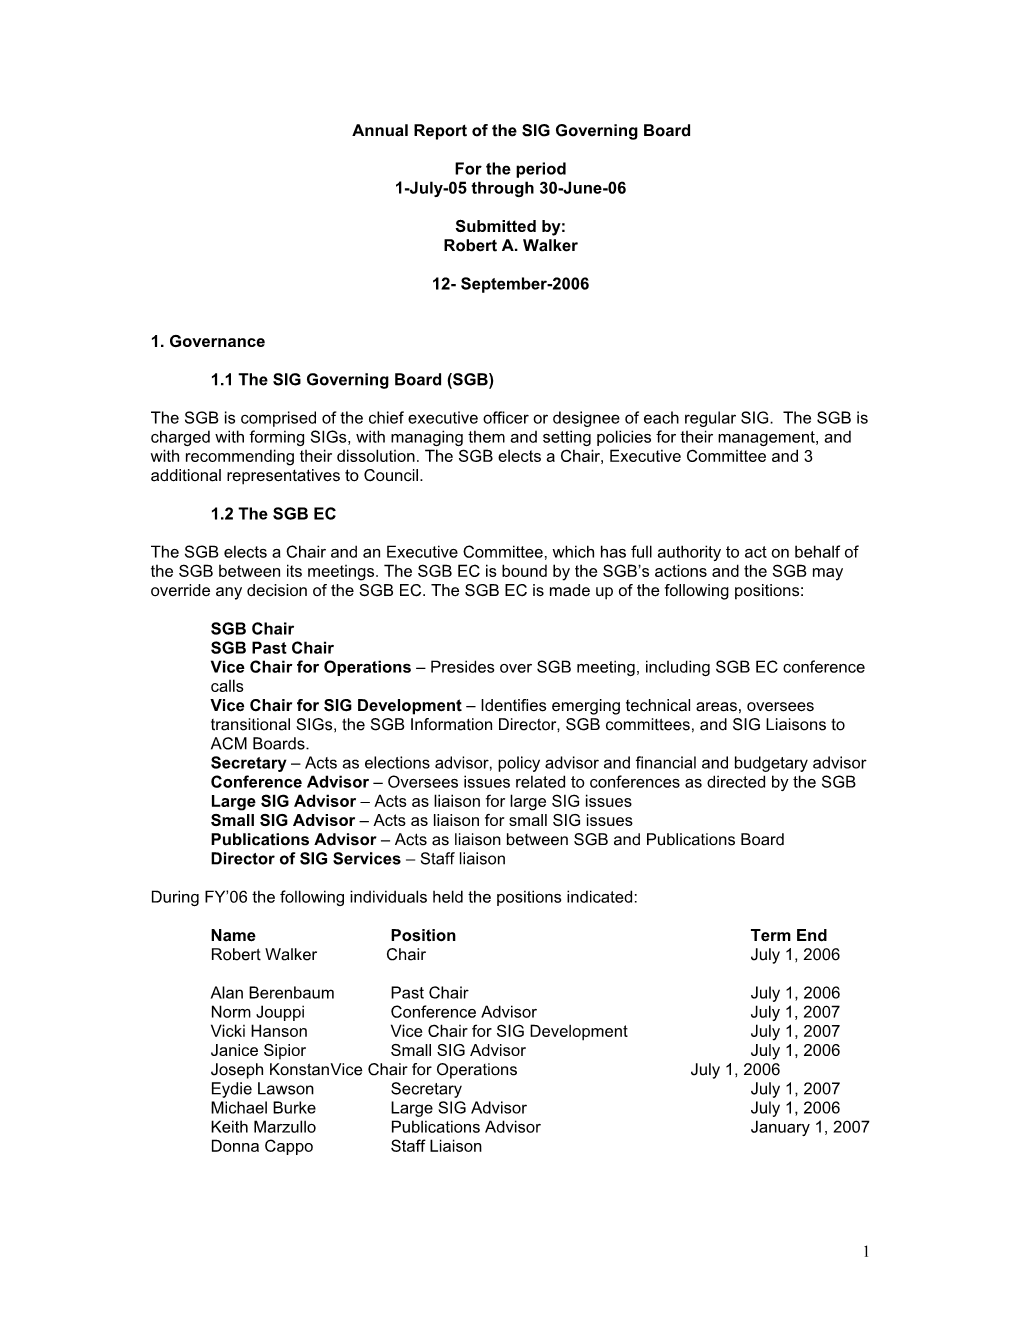 1 Annual Report of the SIG Governing Board for the Period 1-July-05